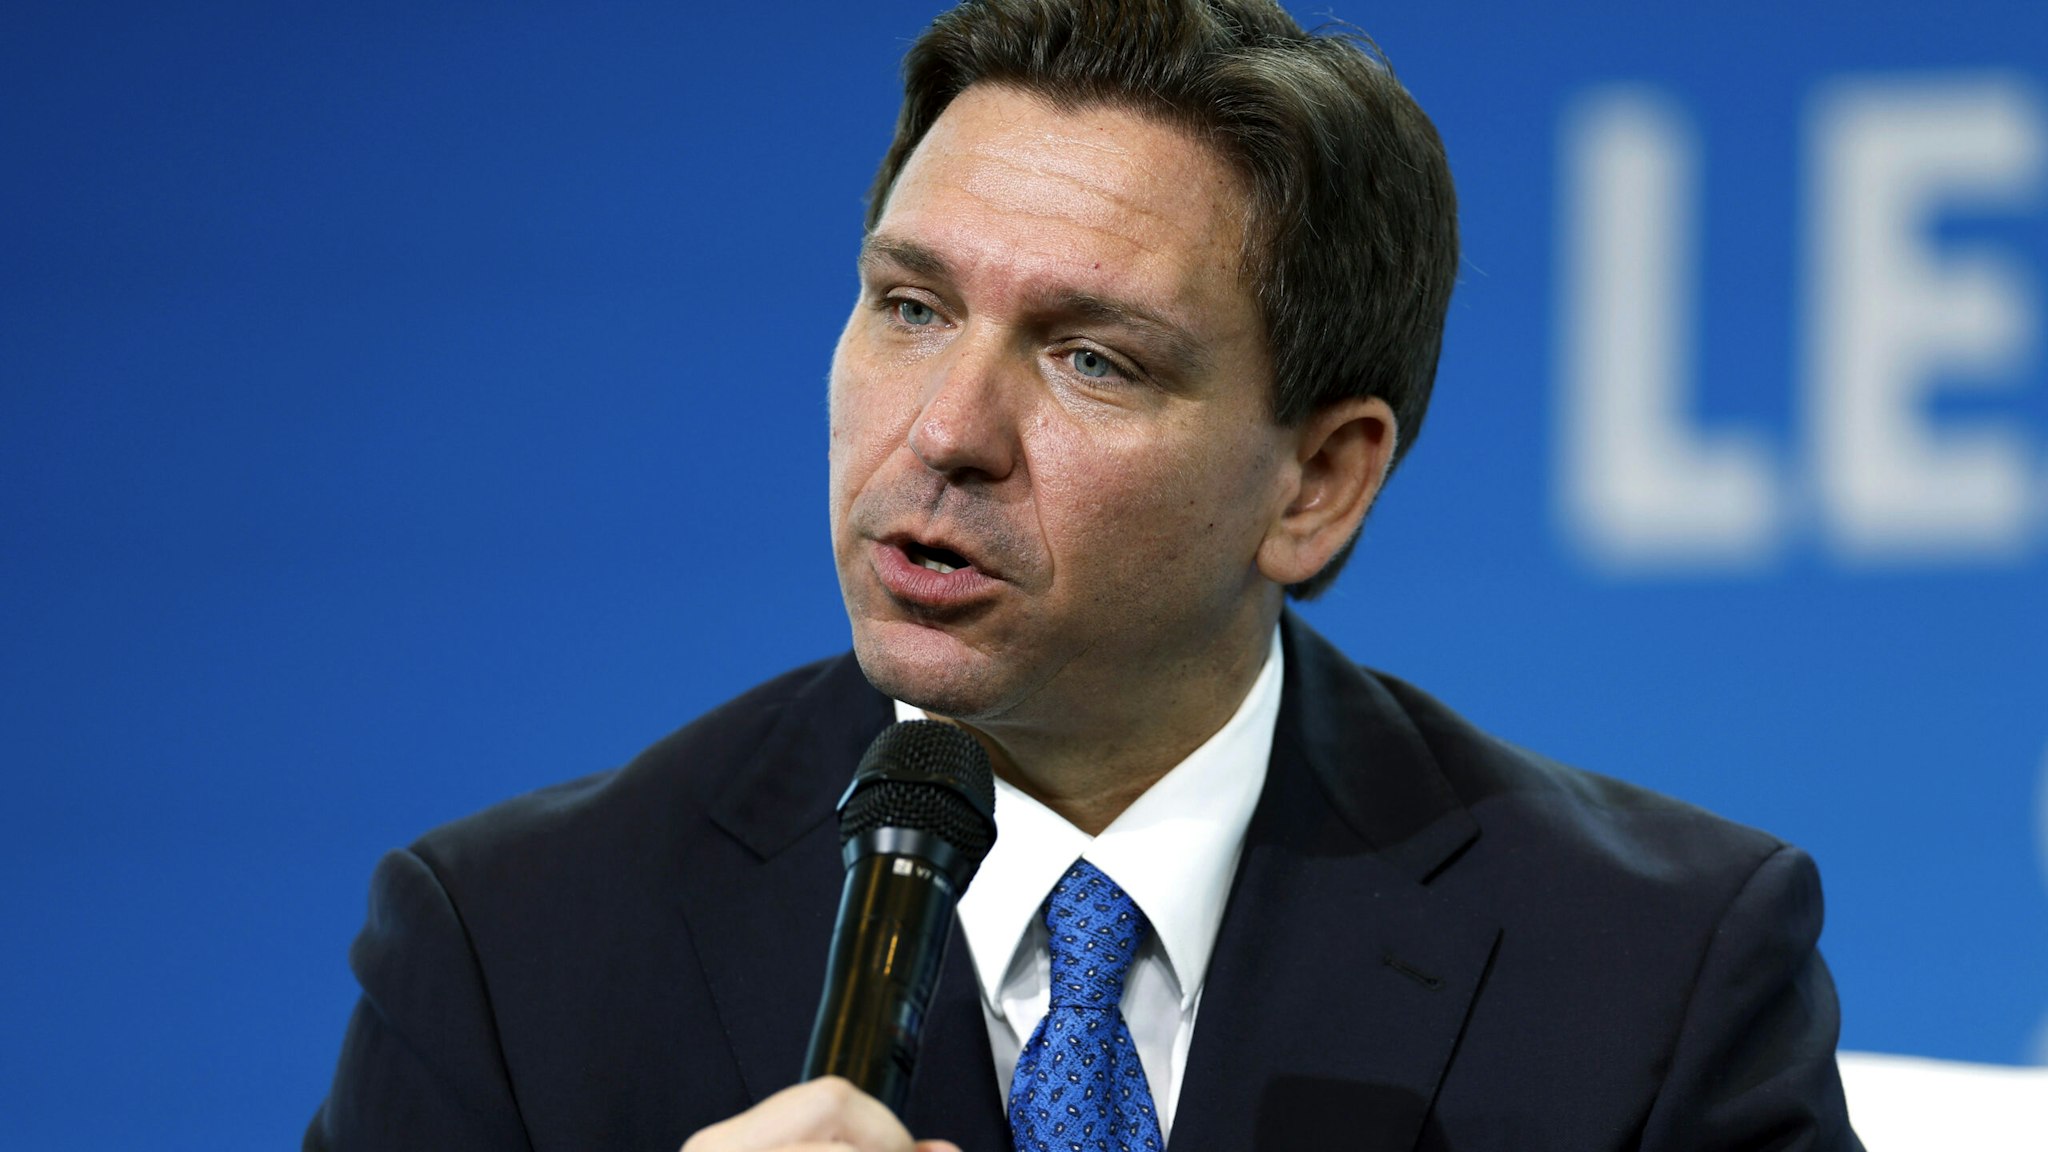 NATIONAL HARBOR, MARYLAND - APRIL 21: Florida Gov. Ron DeSantis speaks alongside Heritage Foundation president Kevin Roberts during the foundation's 50th Anniversary Leadership Summit at the Gaylord National Resort &amp; Convention Center on April 21, 2023 in National Harbor, Maryland. During his remarks DeSantis spoke on policy and social issues his administration has taken on in the state of Florida including education in schools, funding law enforcement, and gun legislation.